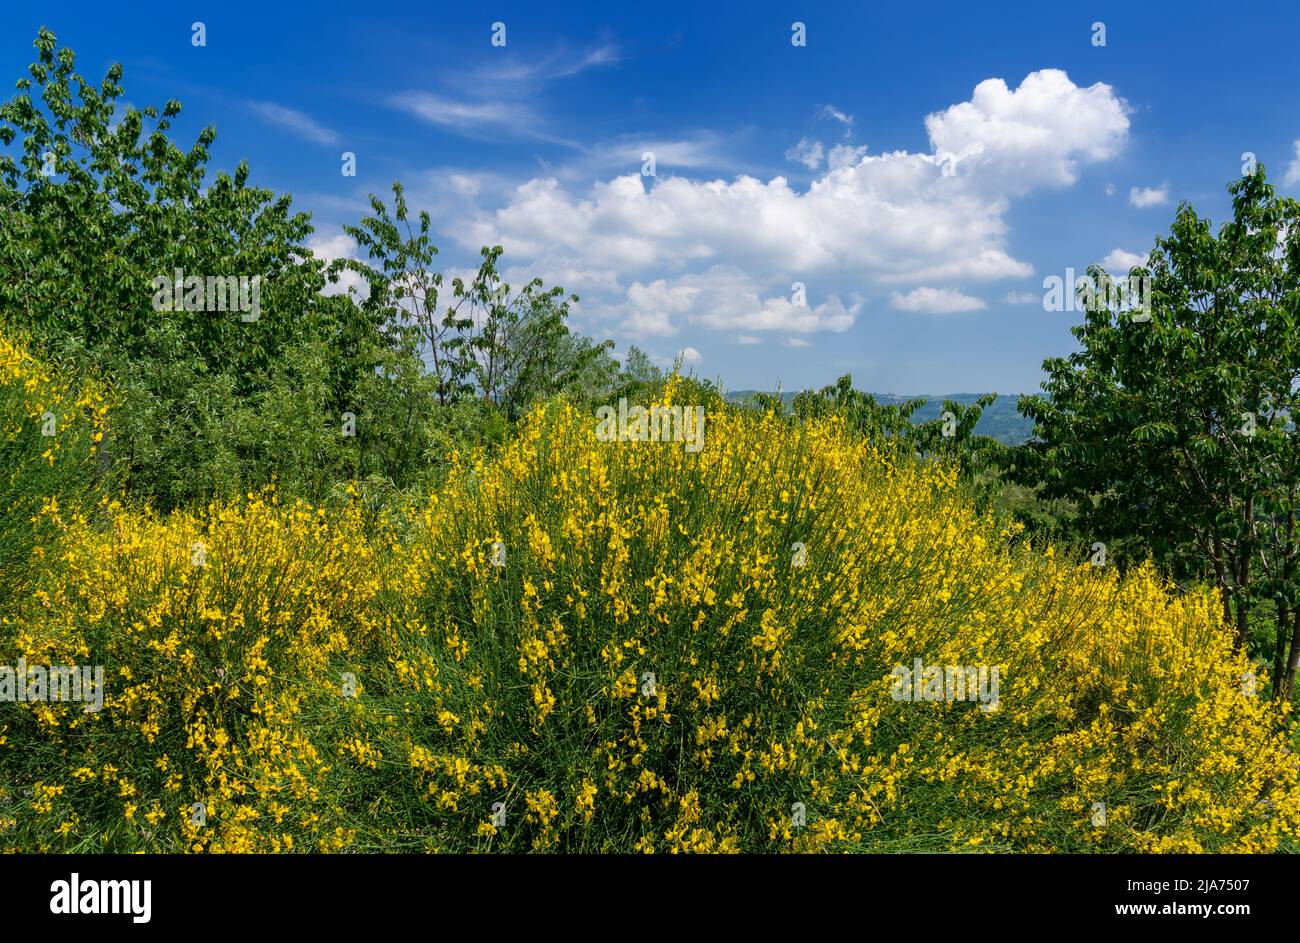 Landscape with blooming yellow gorse bushes on blue sky with white clouds Stock Photo